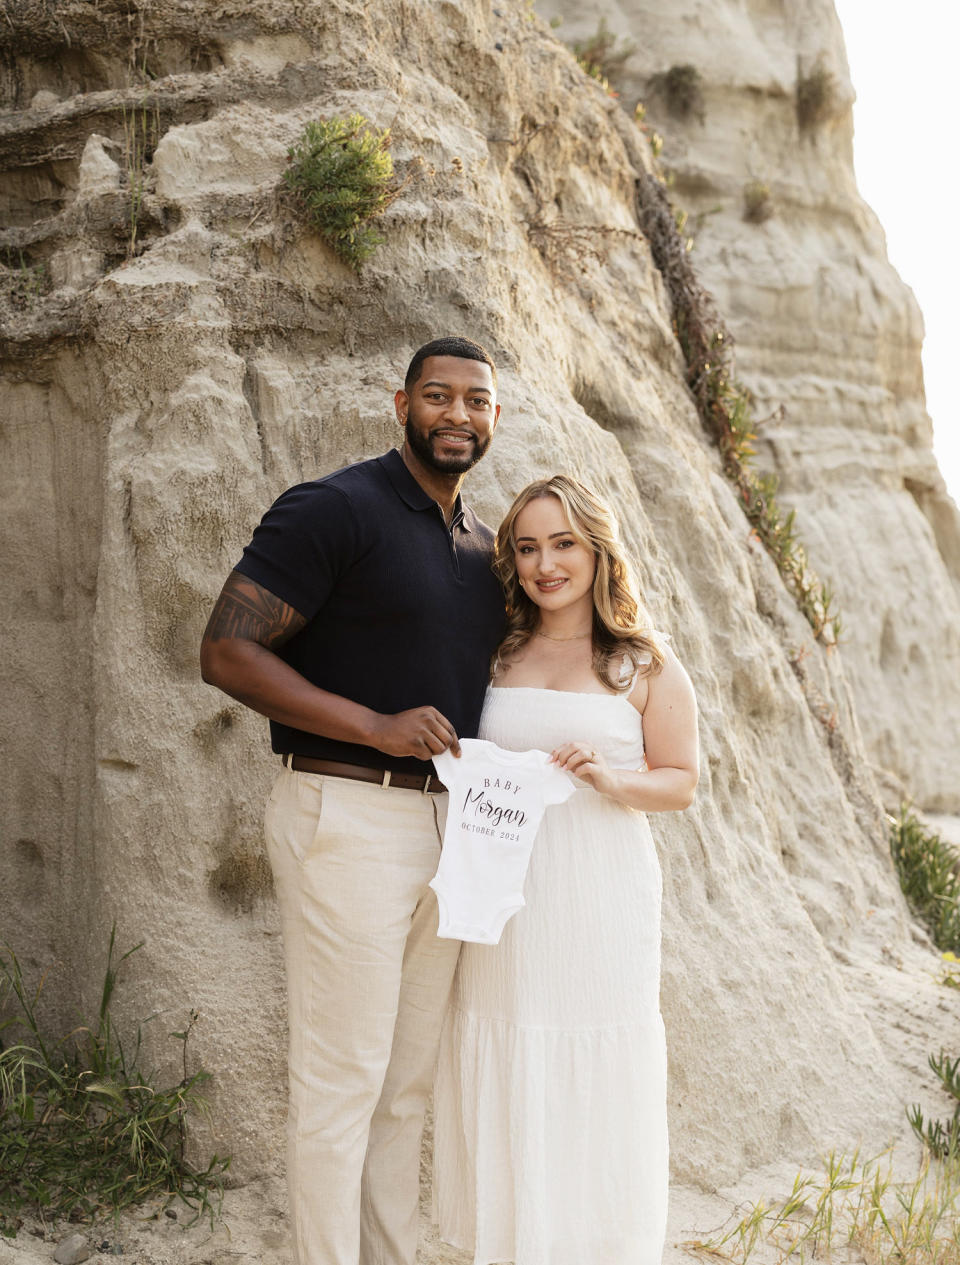 Darien and Golda Morgan are expecting a girl, and Darien's parents could not be more excited. (Courtesy Jackie Tran Photo)